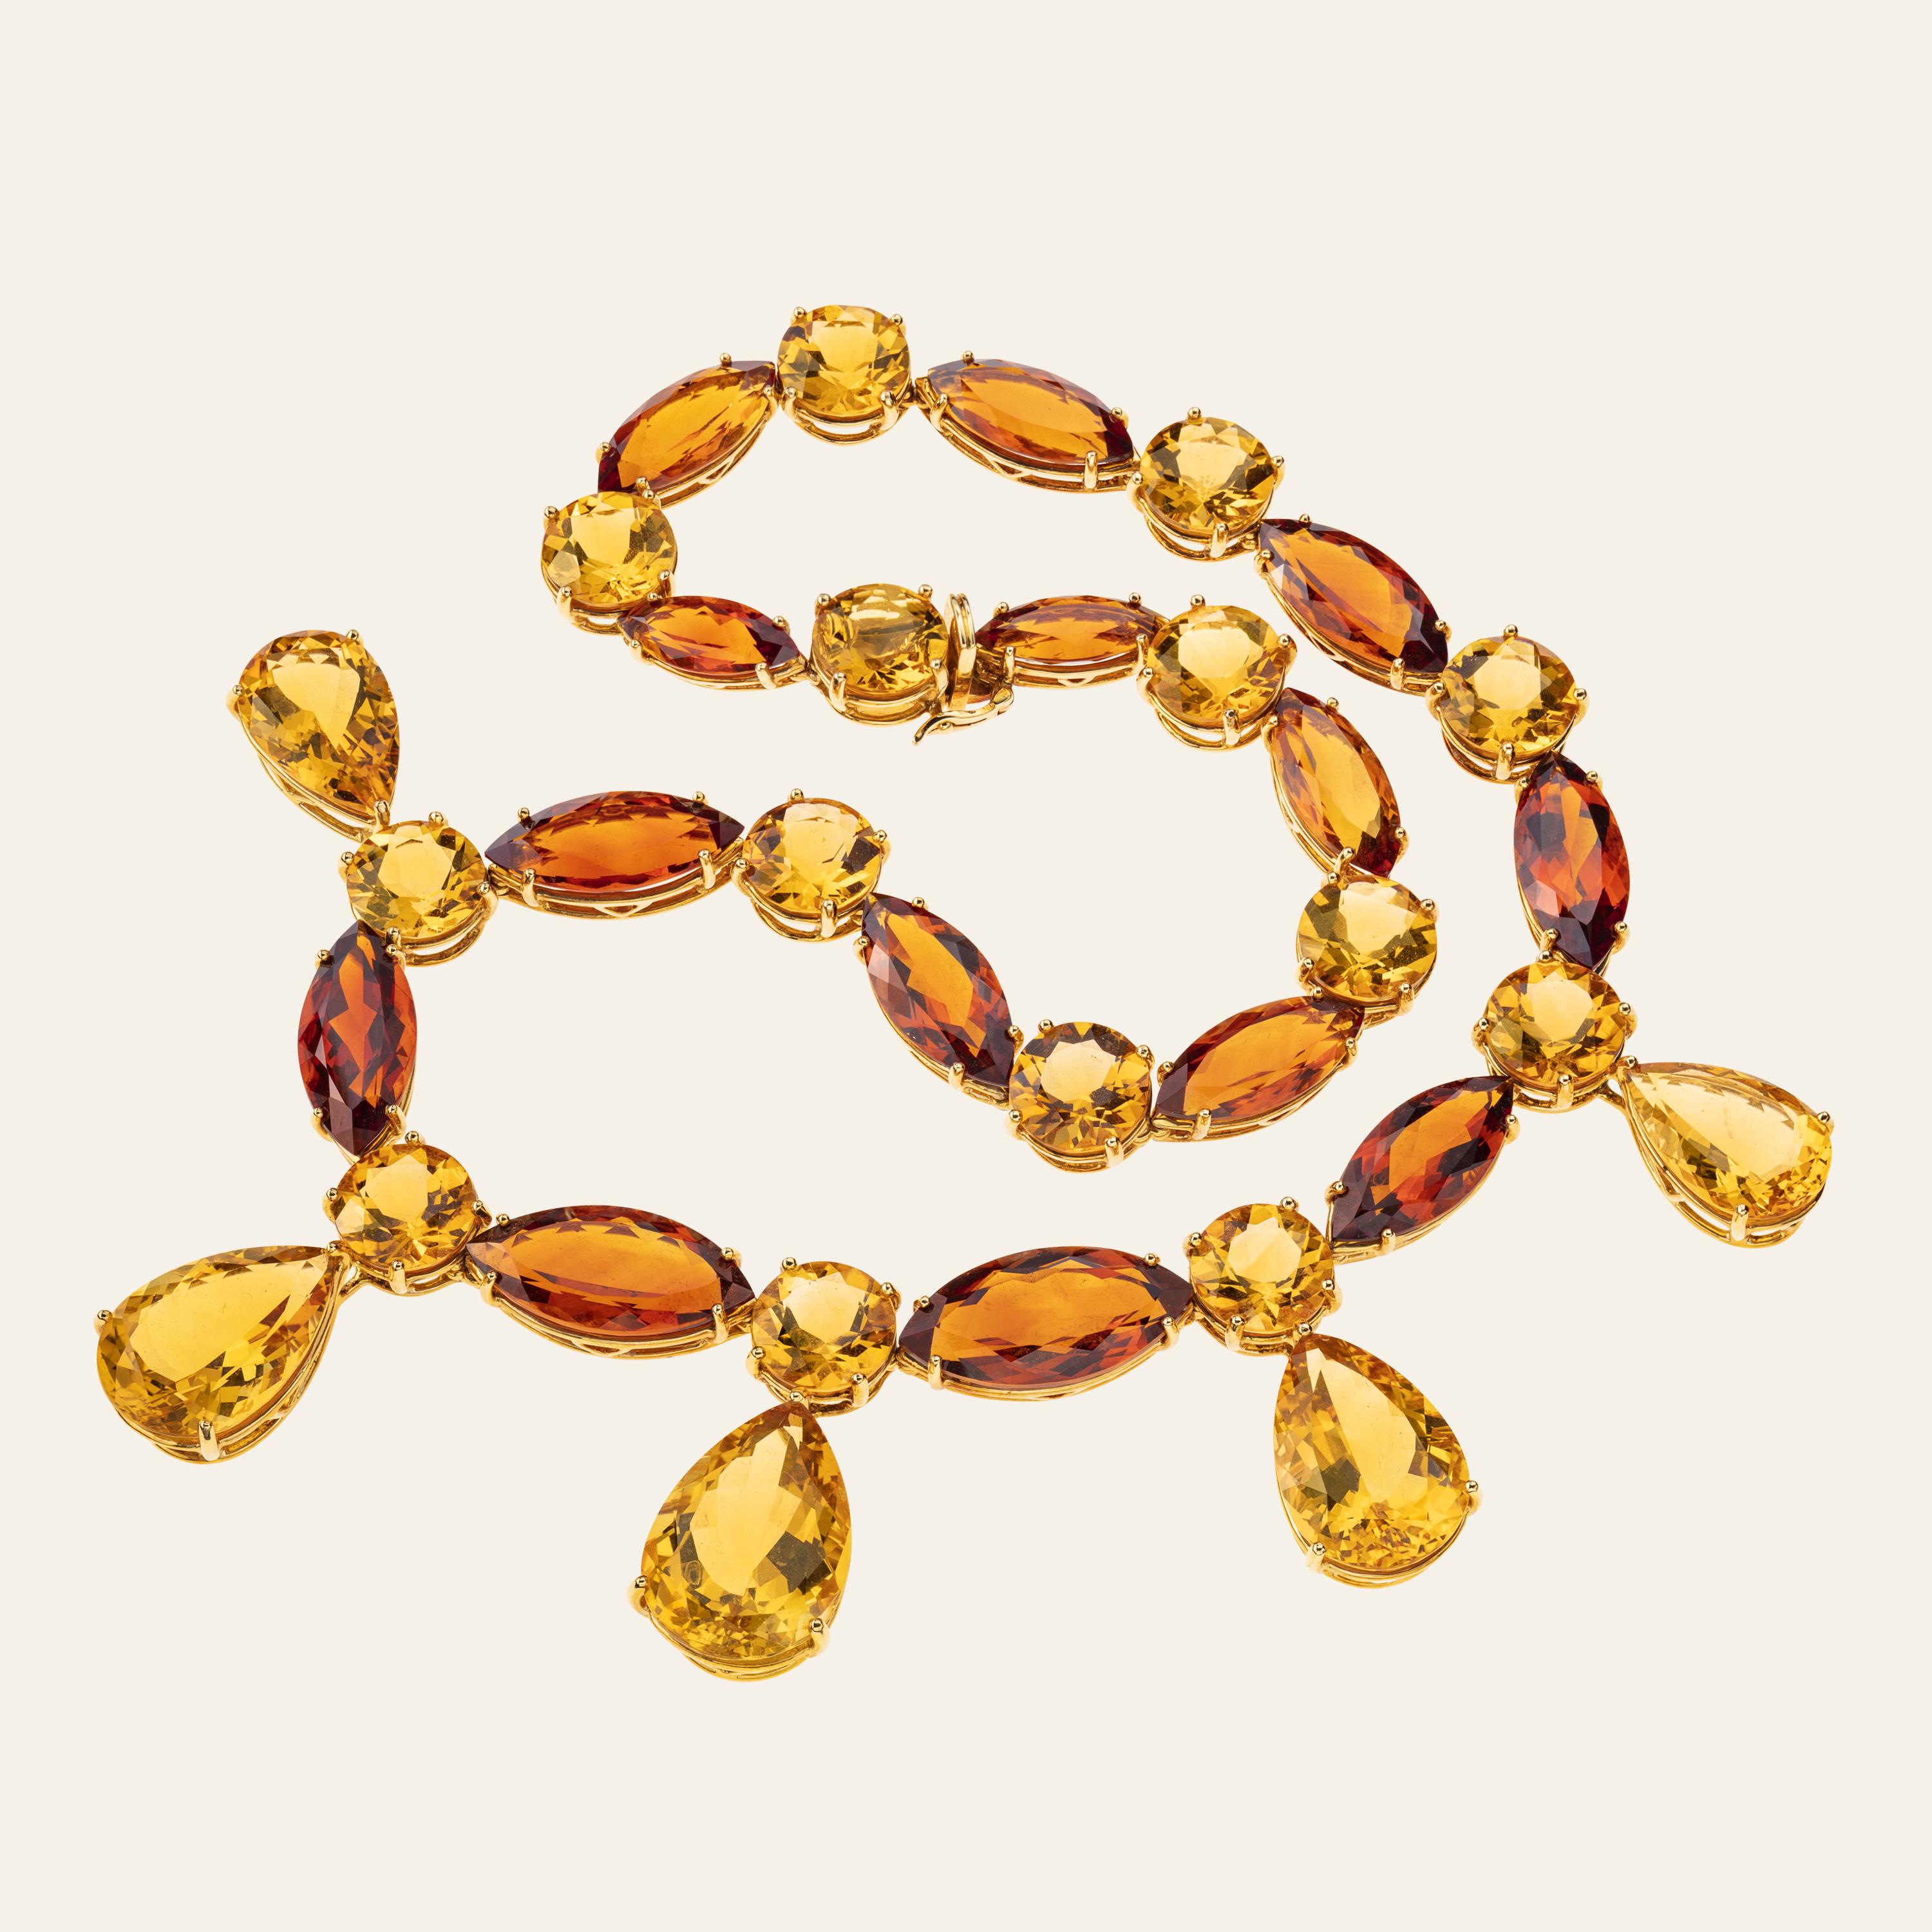 Sabbadini Jewelry 152 Carats Citrine Necklace 
18k Yellow gold necklace, fancy shape cut dark and light citrines 152carats. 
Gold 47,93 grams
Made In Italy
Handmade Jewelry 